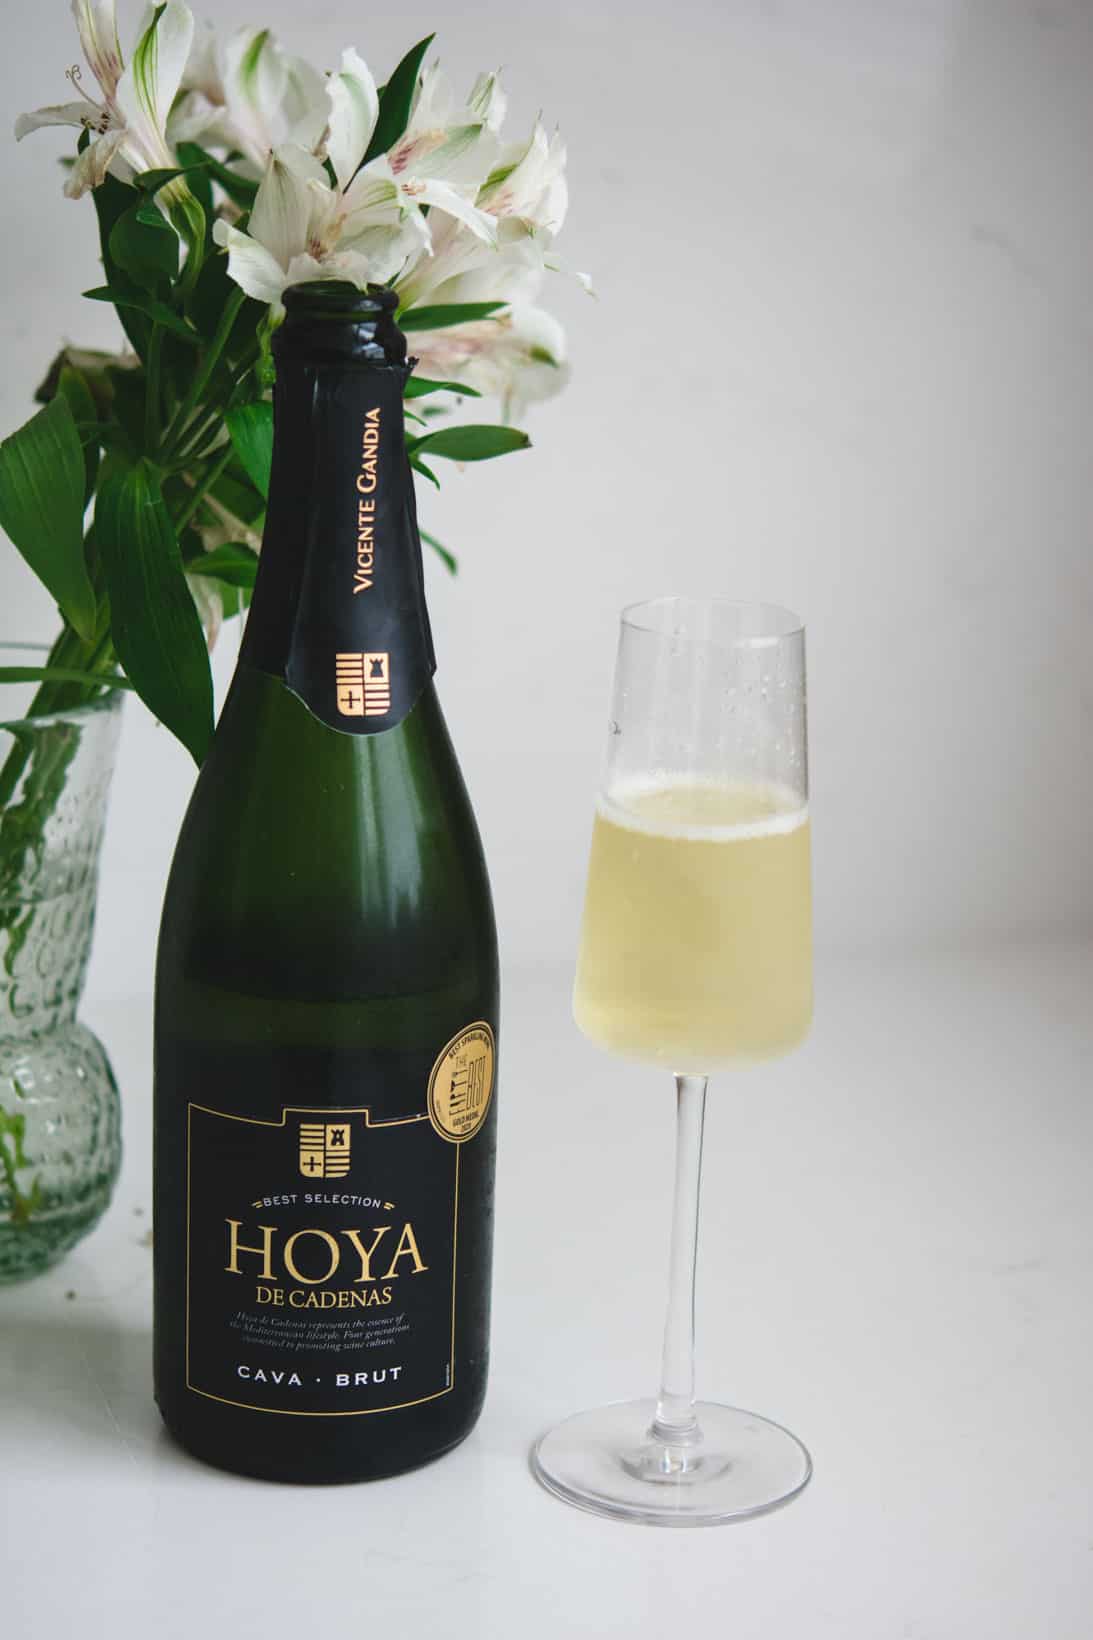 Hoya di Cardenas bottle and glass of cava wine with white flowers in the background